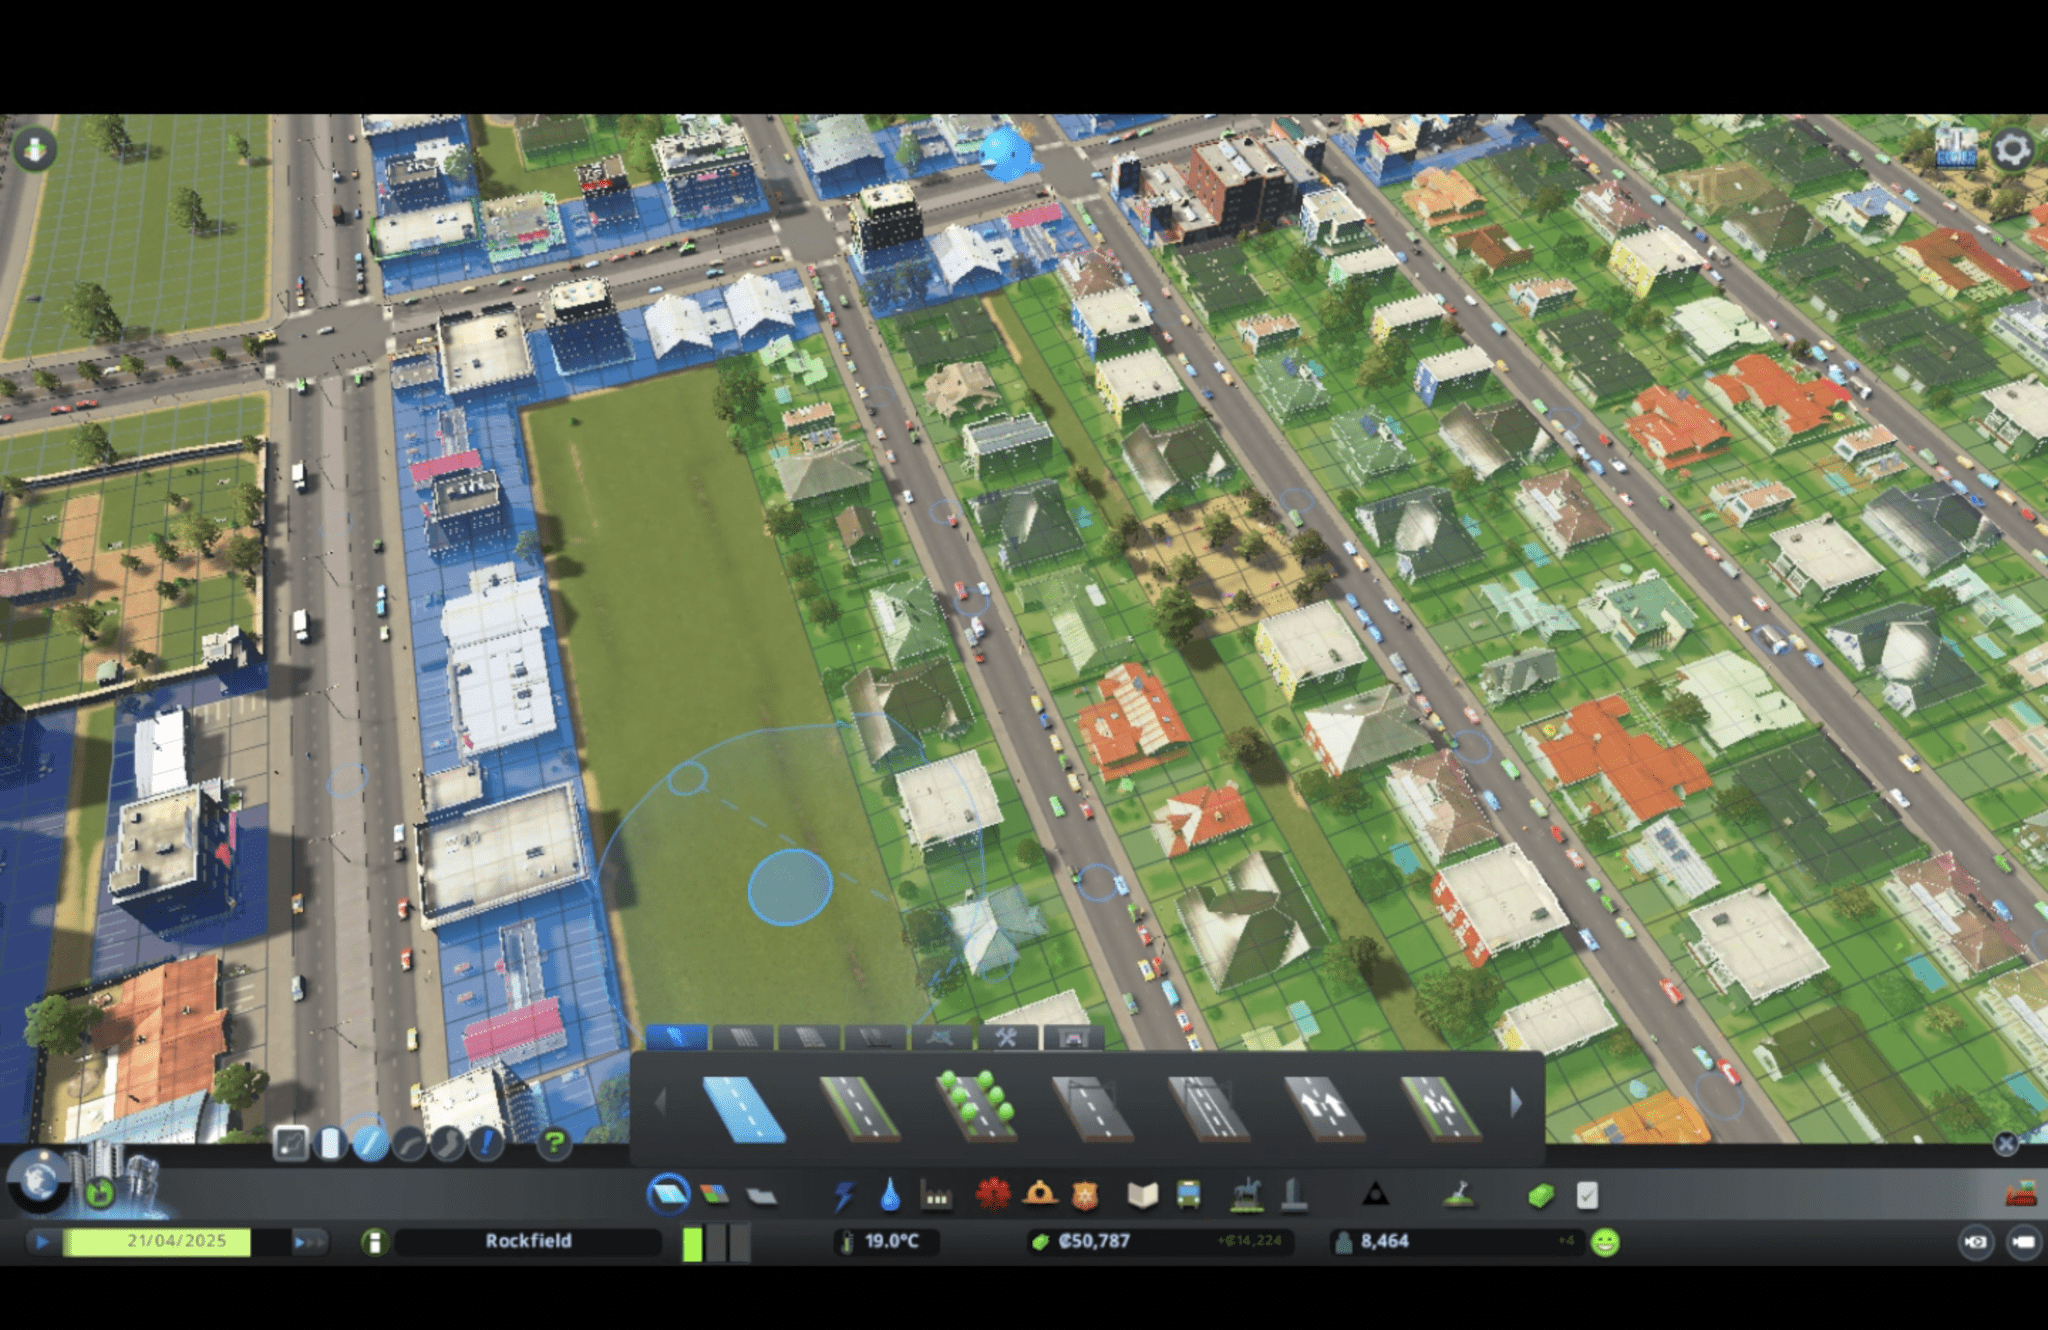 Parking lots in Cities Skylines - StrateGGames